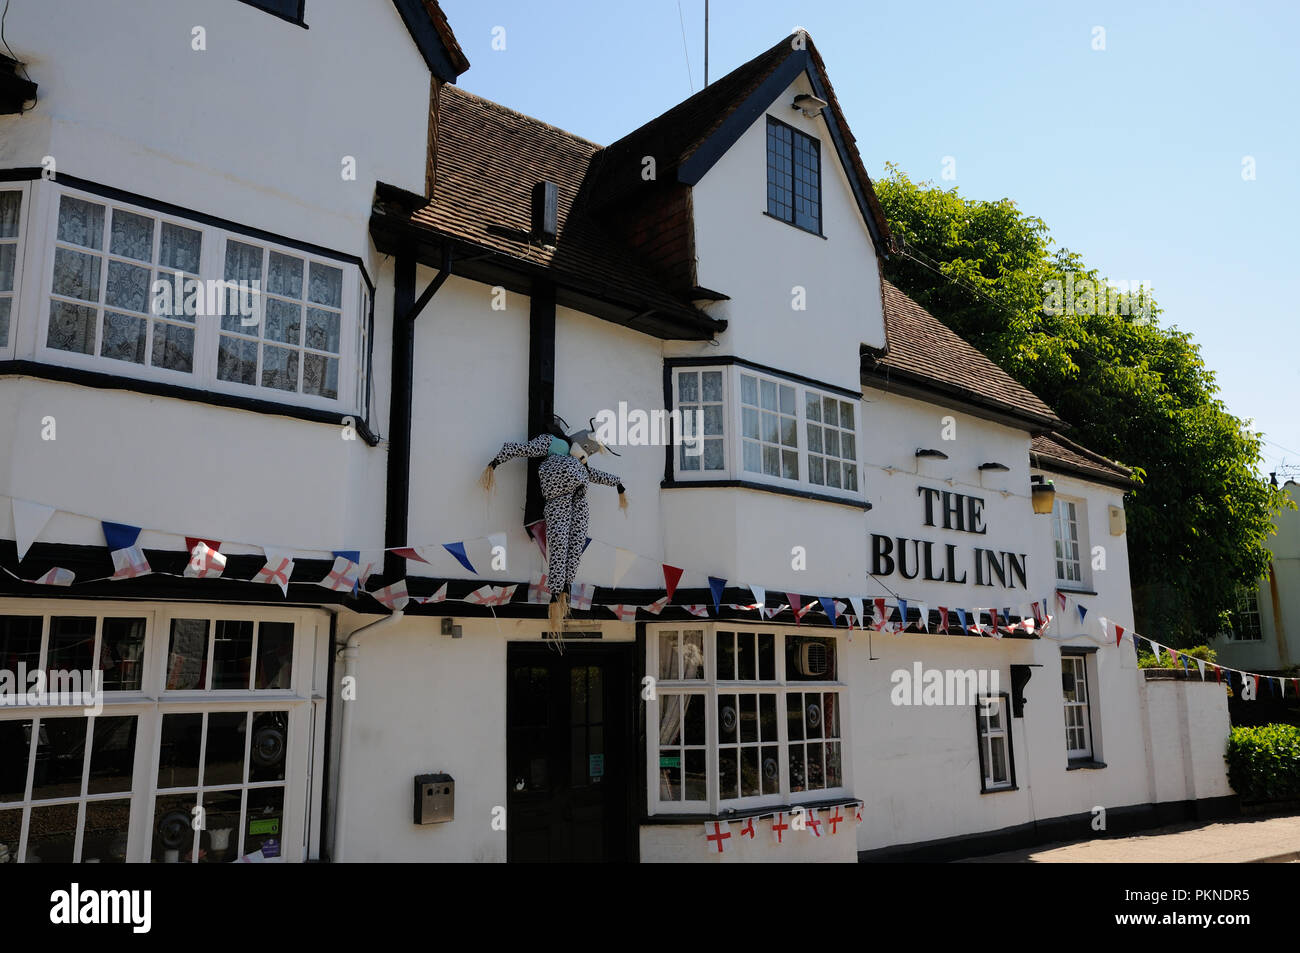 The Bull Inn, High Street, Whitwell, Hertfordshire.   A local legend has it that a secret passage ran from the cellars, under the River Mimram, to joi Stock Photo